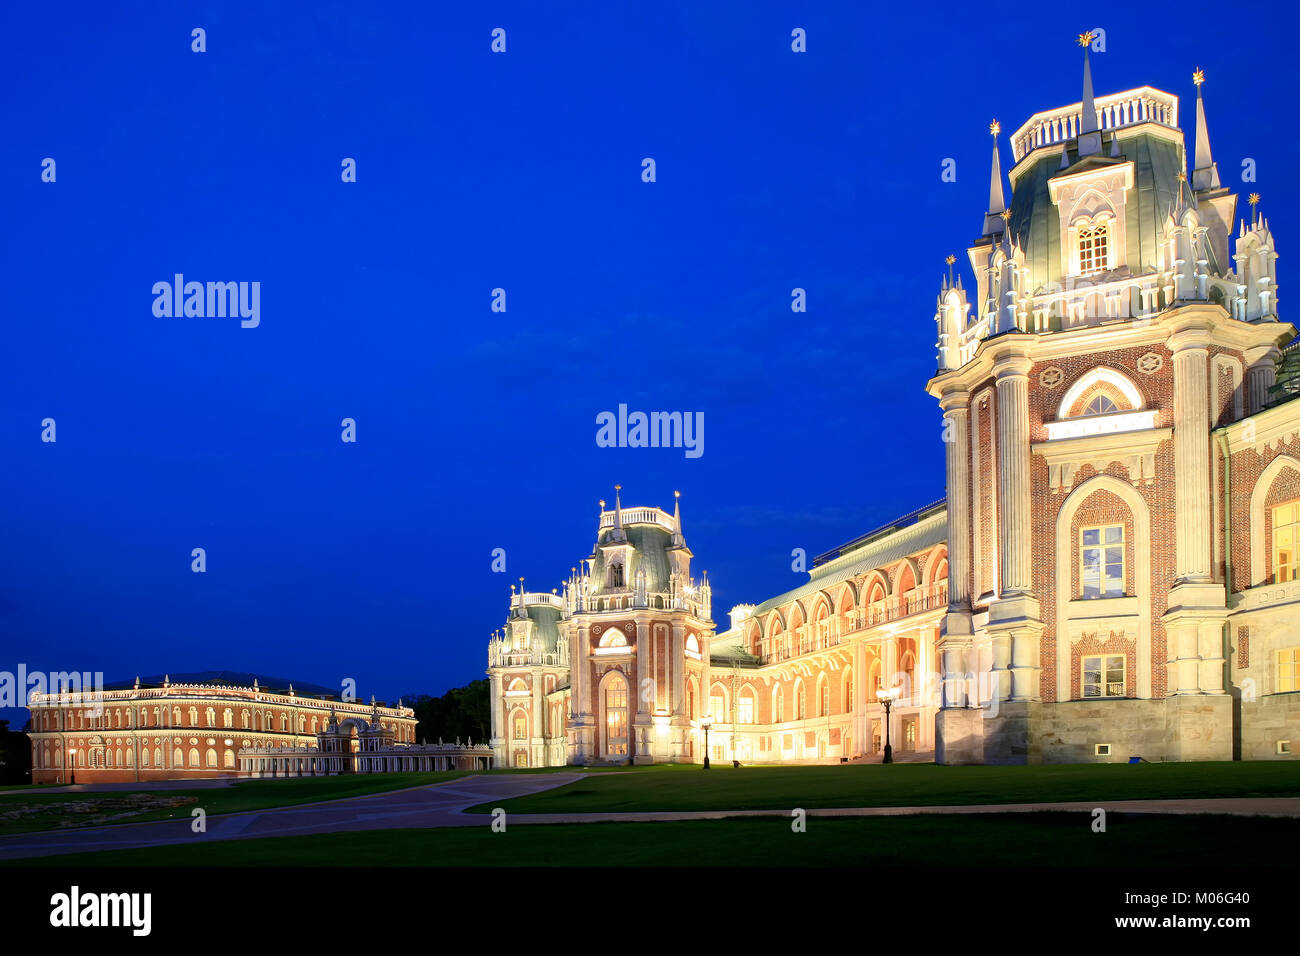 Facade of the 18th century Neo-Gothic (Gothic Revival) Tsaritsyno Palace in Moscow, Russia at twilight Stock Photo